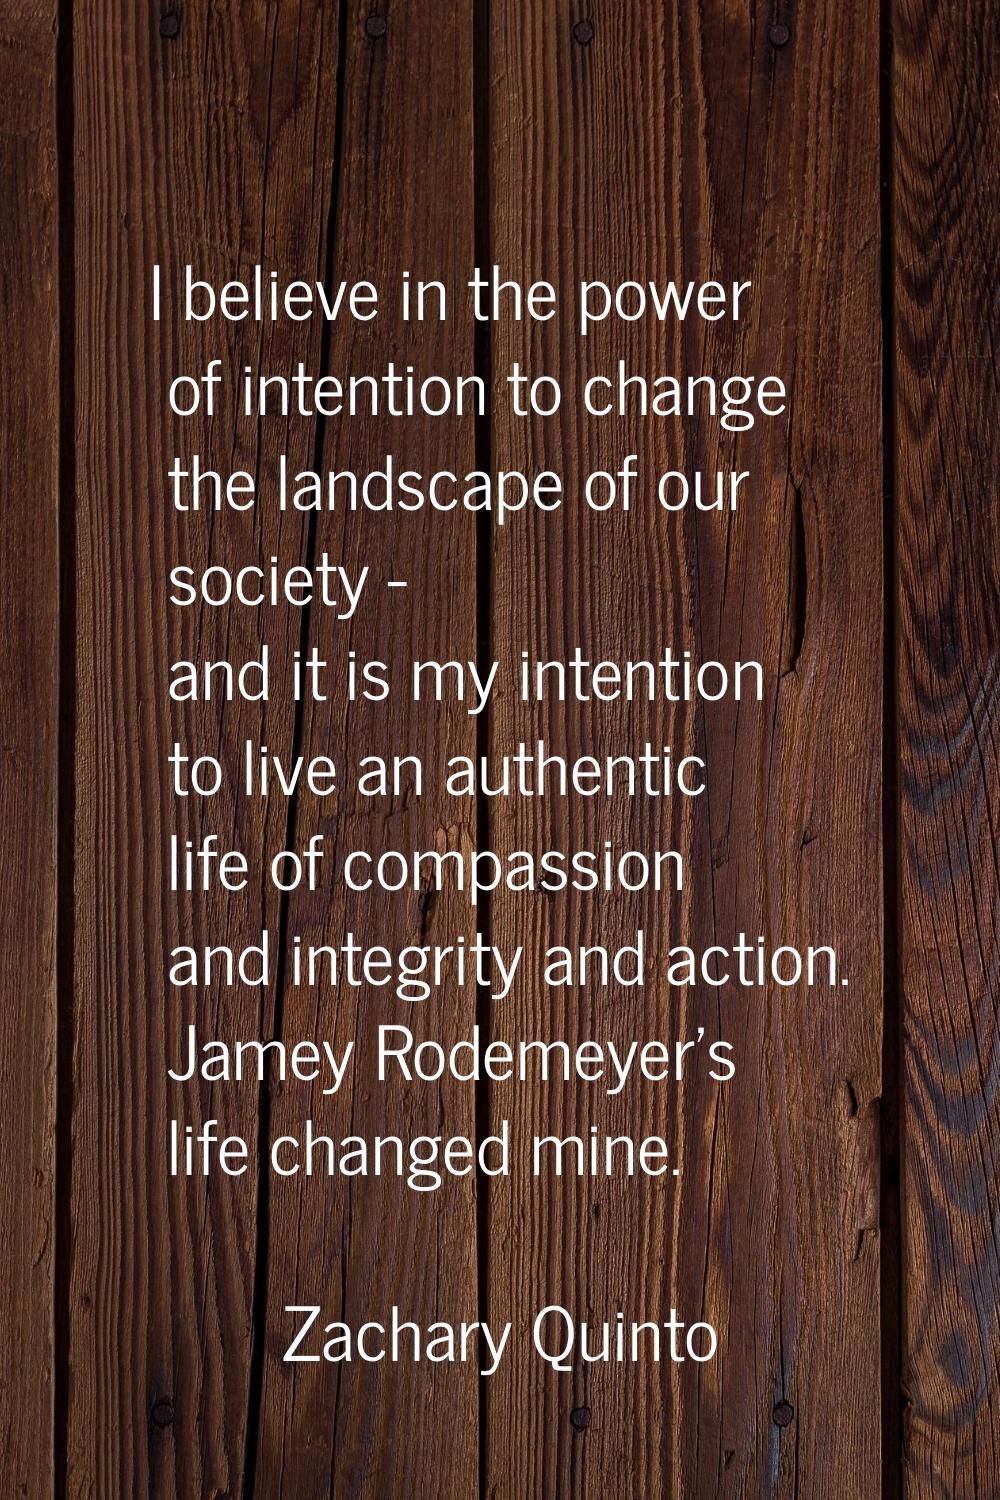 I believe in the power of intention to change the landscape of our society - and it is my intention